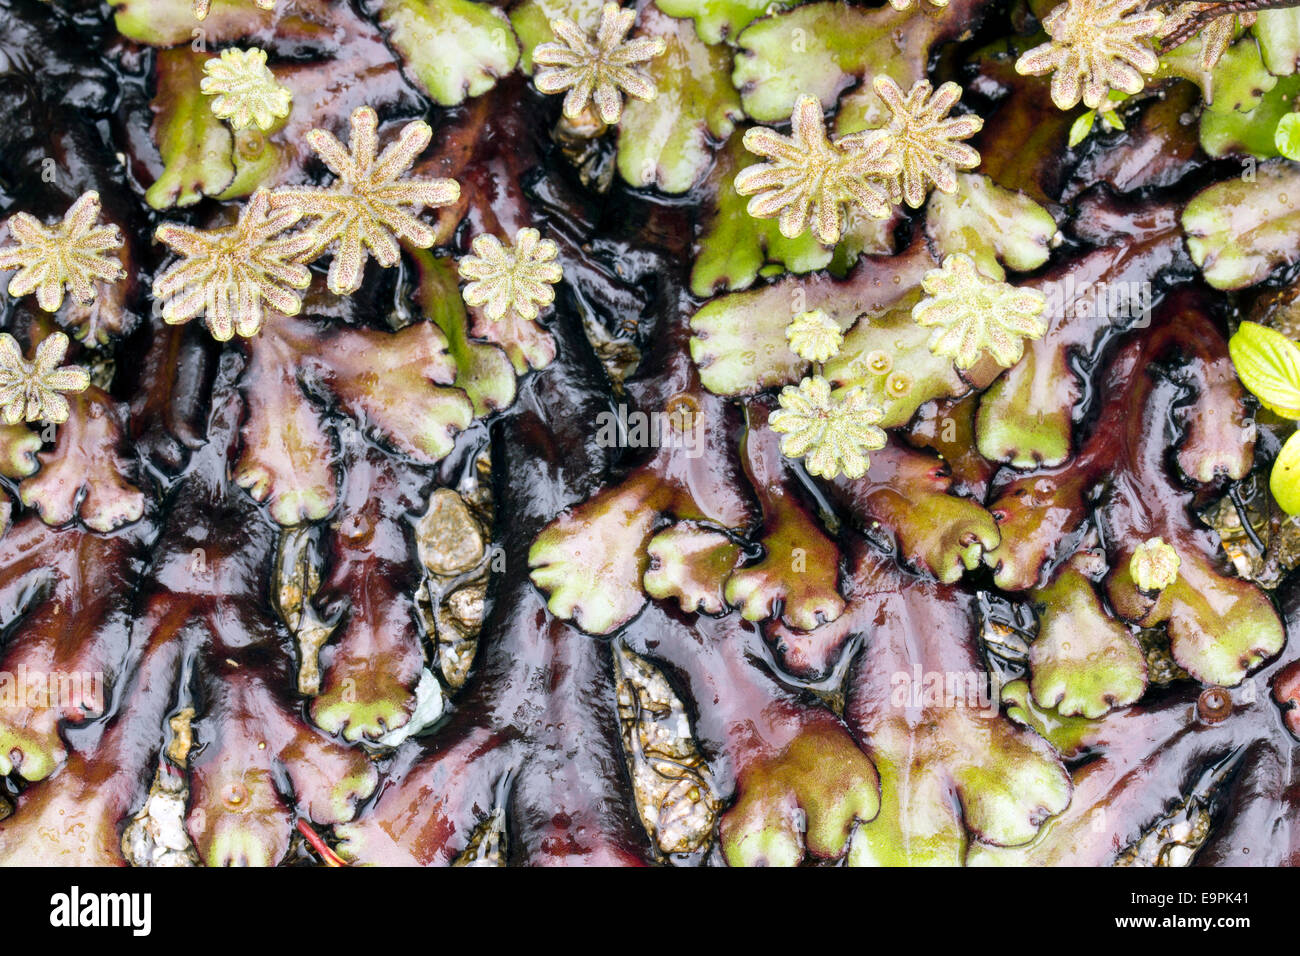 Marchantia liverworts with fruiting bodies (sporocarps) growing in cloudforest in the Ecuadorian Andes Stock Photo